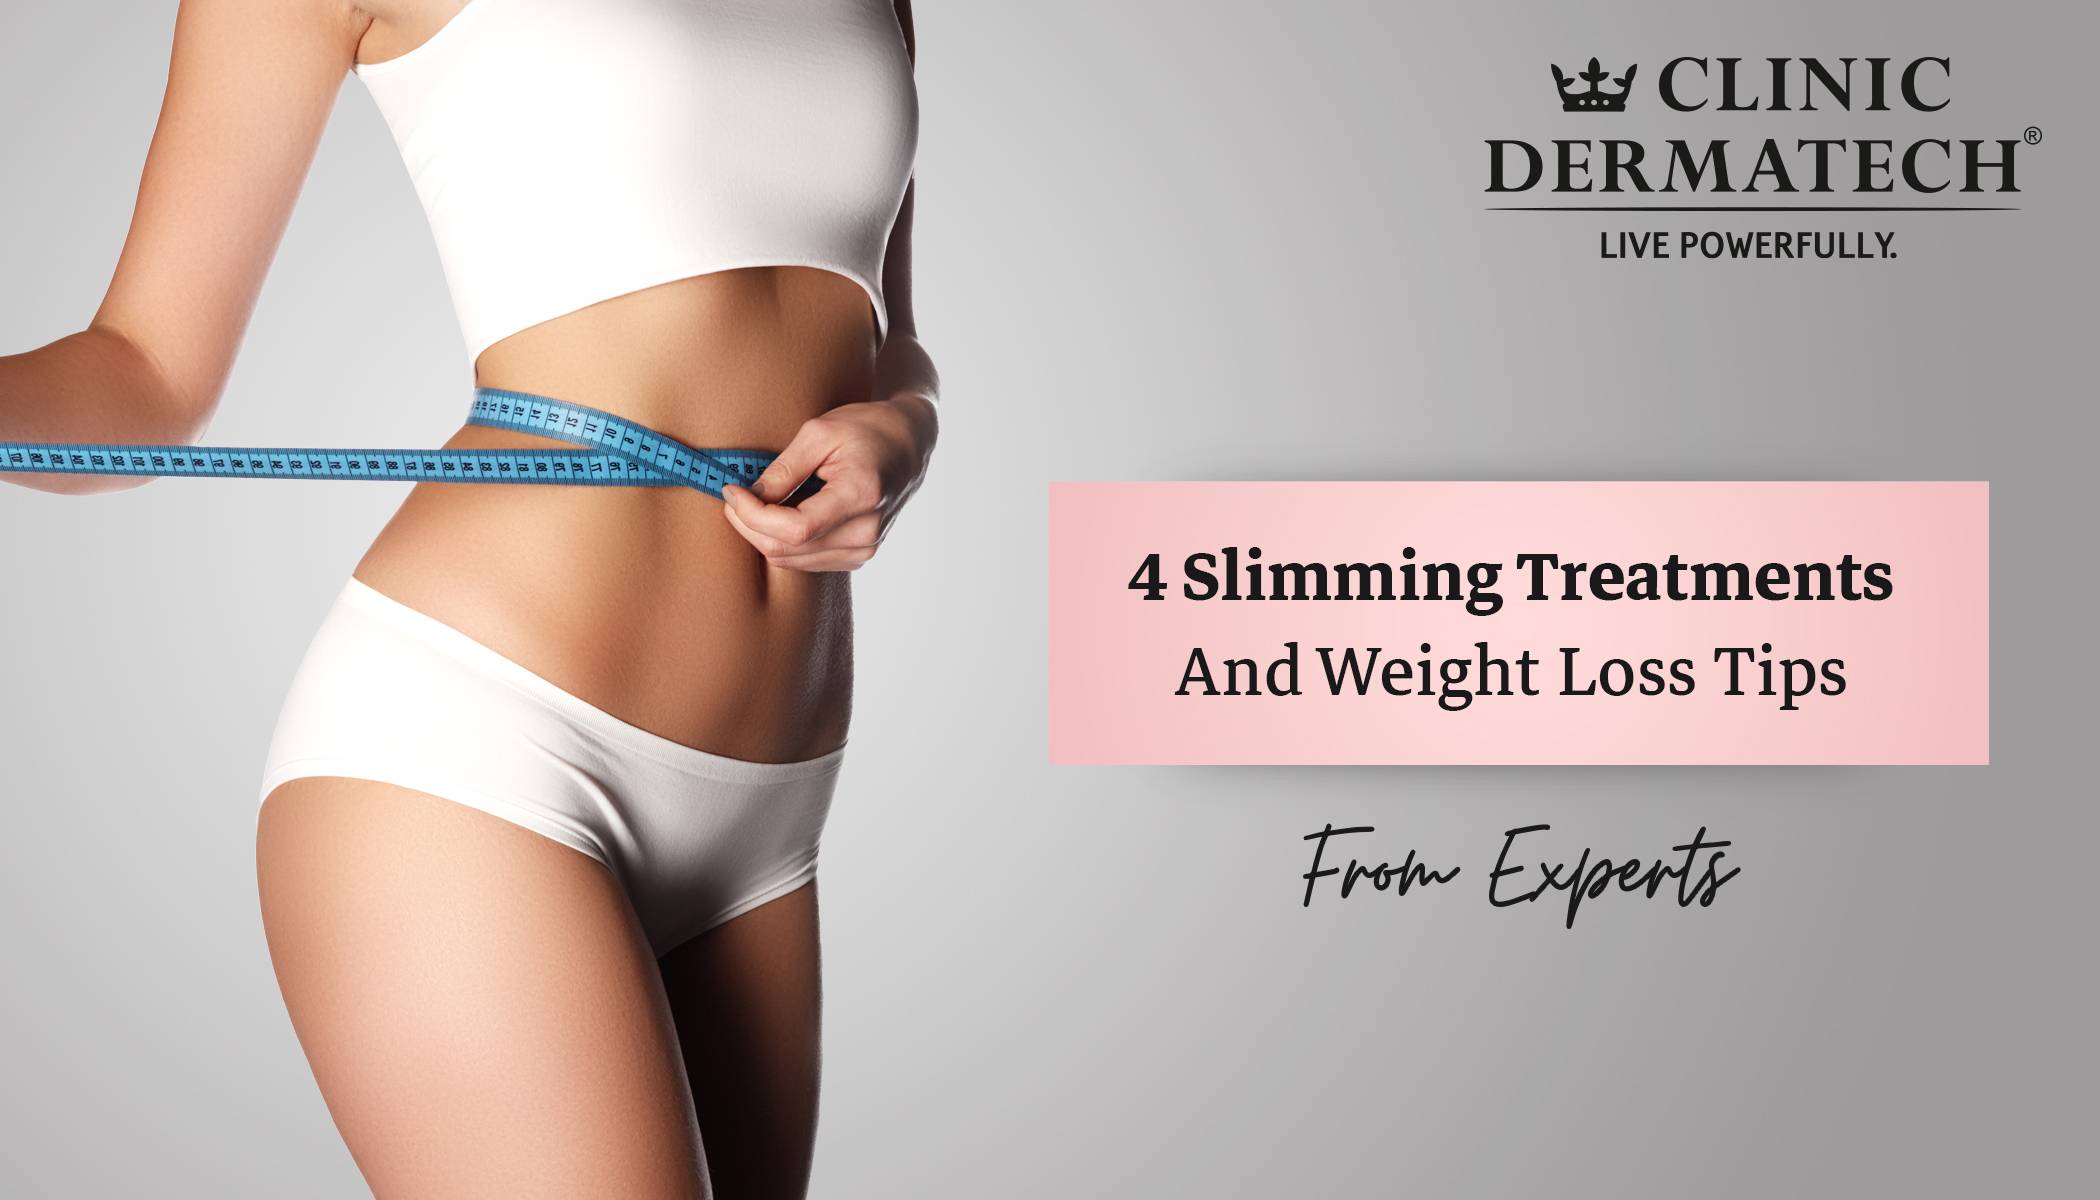 Non-Surgical Slimming Treatments